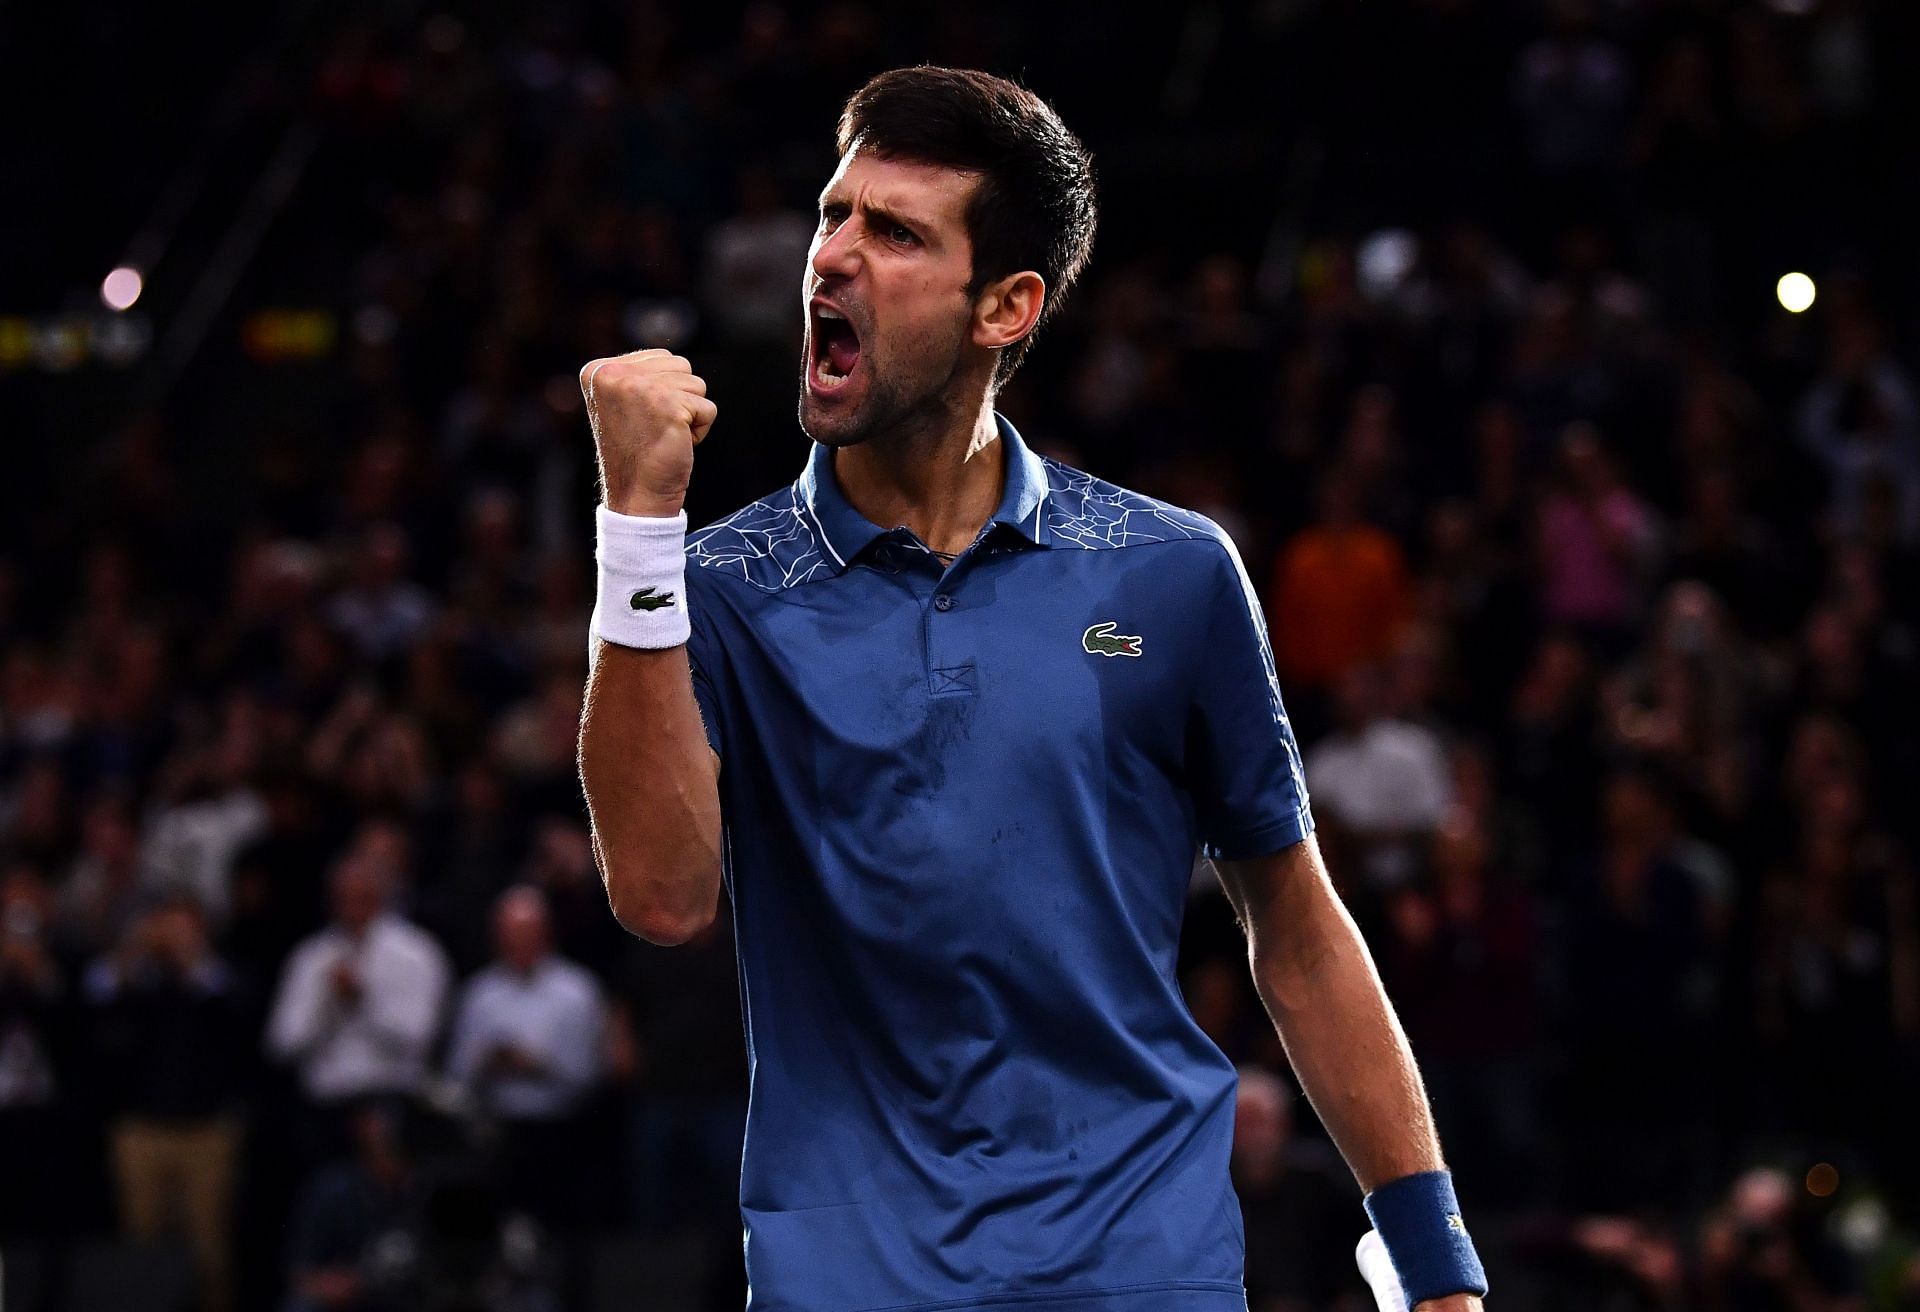 Novak Djokovic is confirmed to represent Serbia at the 2021 Davis Cup Finals.